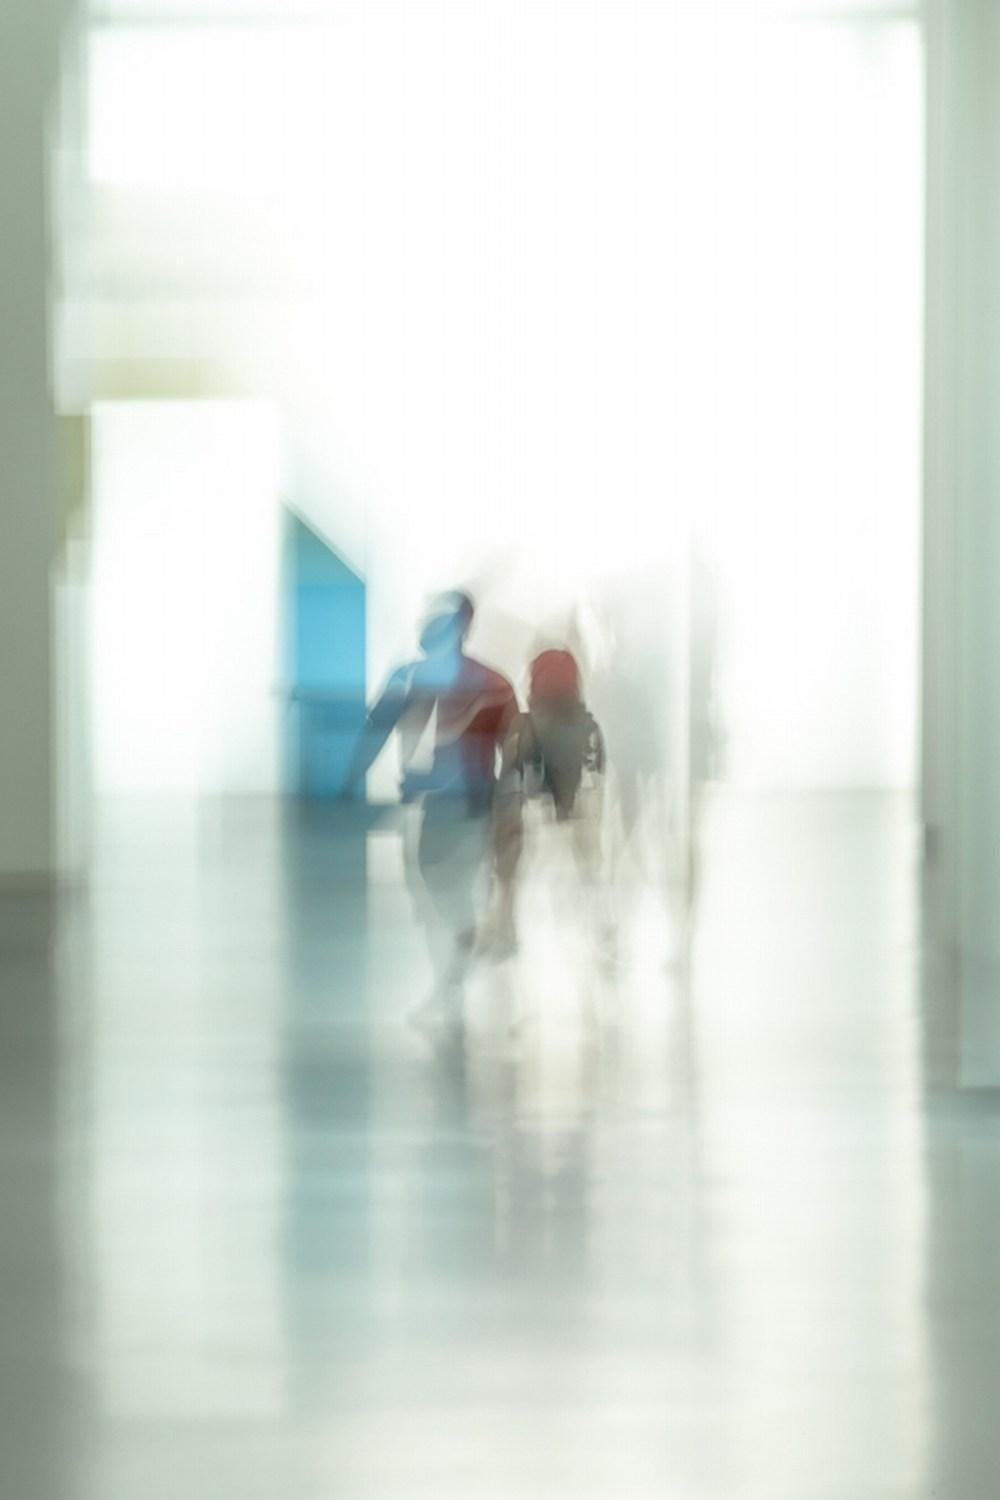 Anne K Smith Abstract Photograph - Untitled #23 (from Unfocused Series)